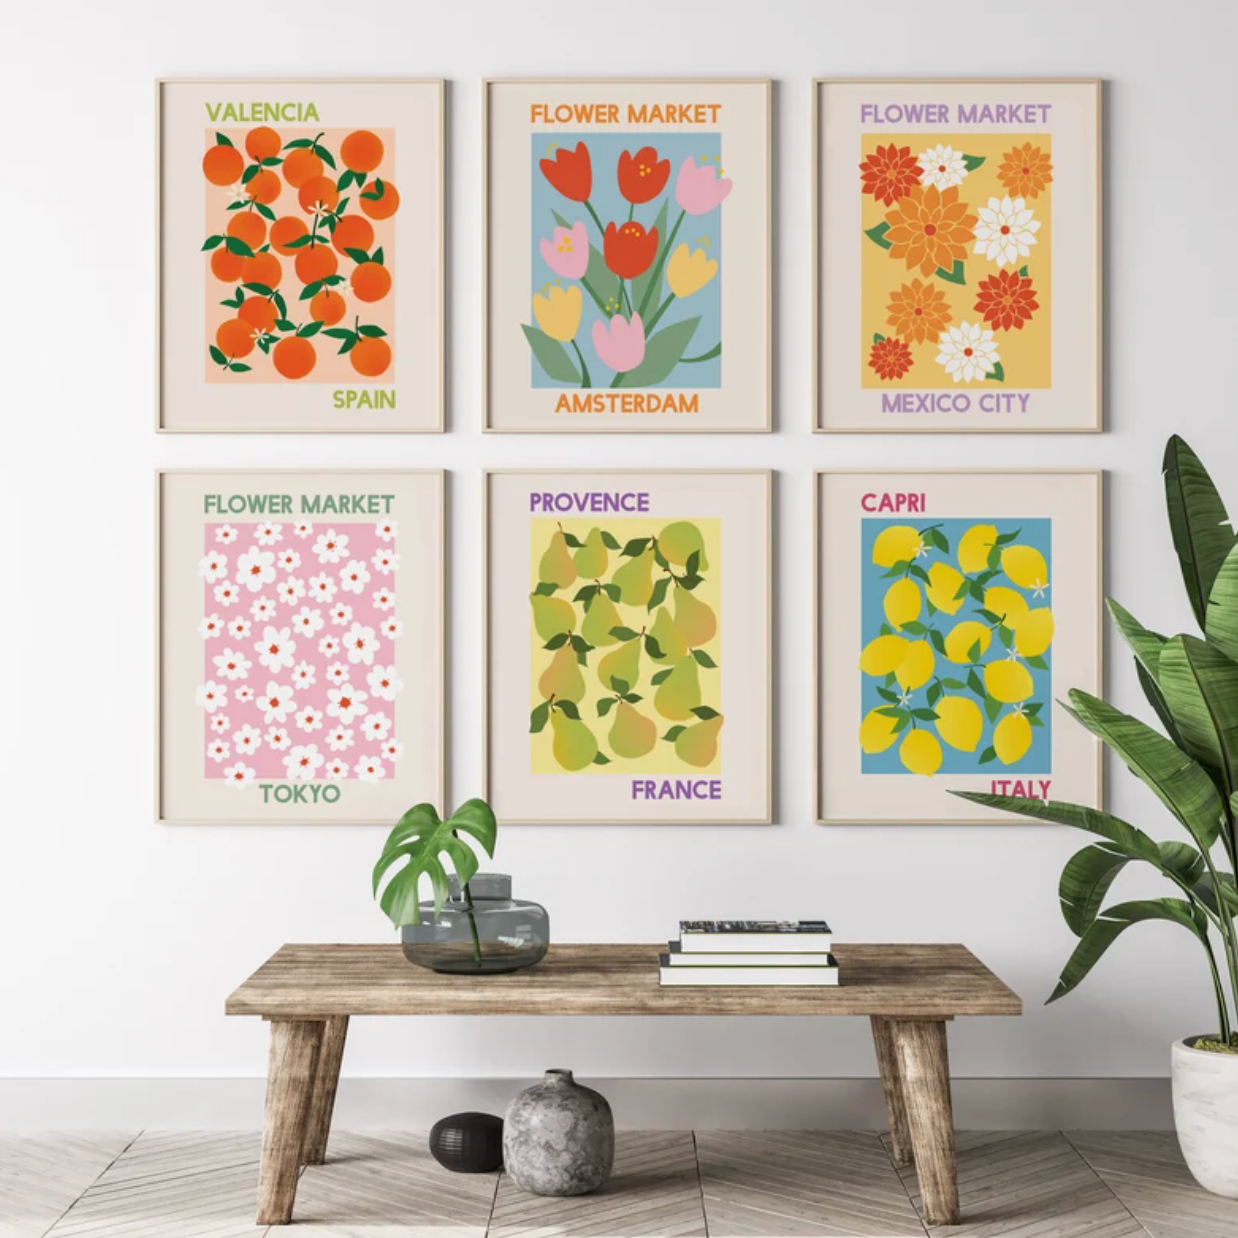 framed digital art prints featuring florals found in different global cities above bench